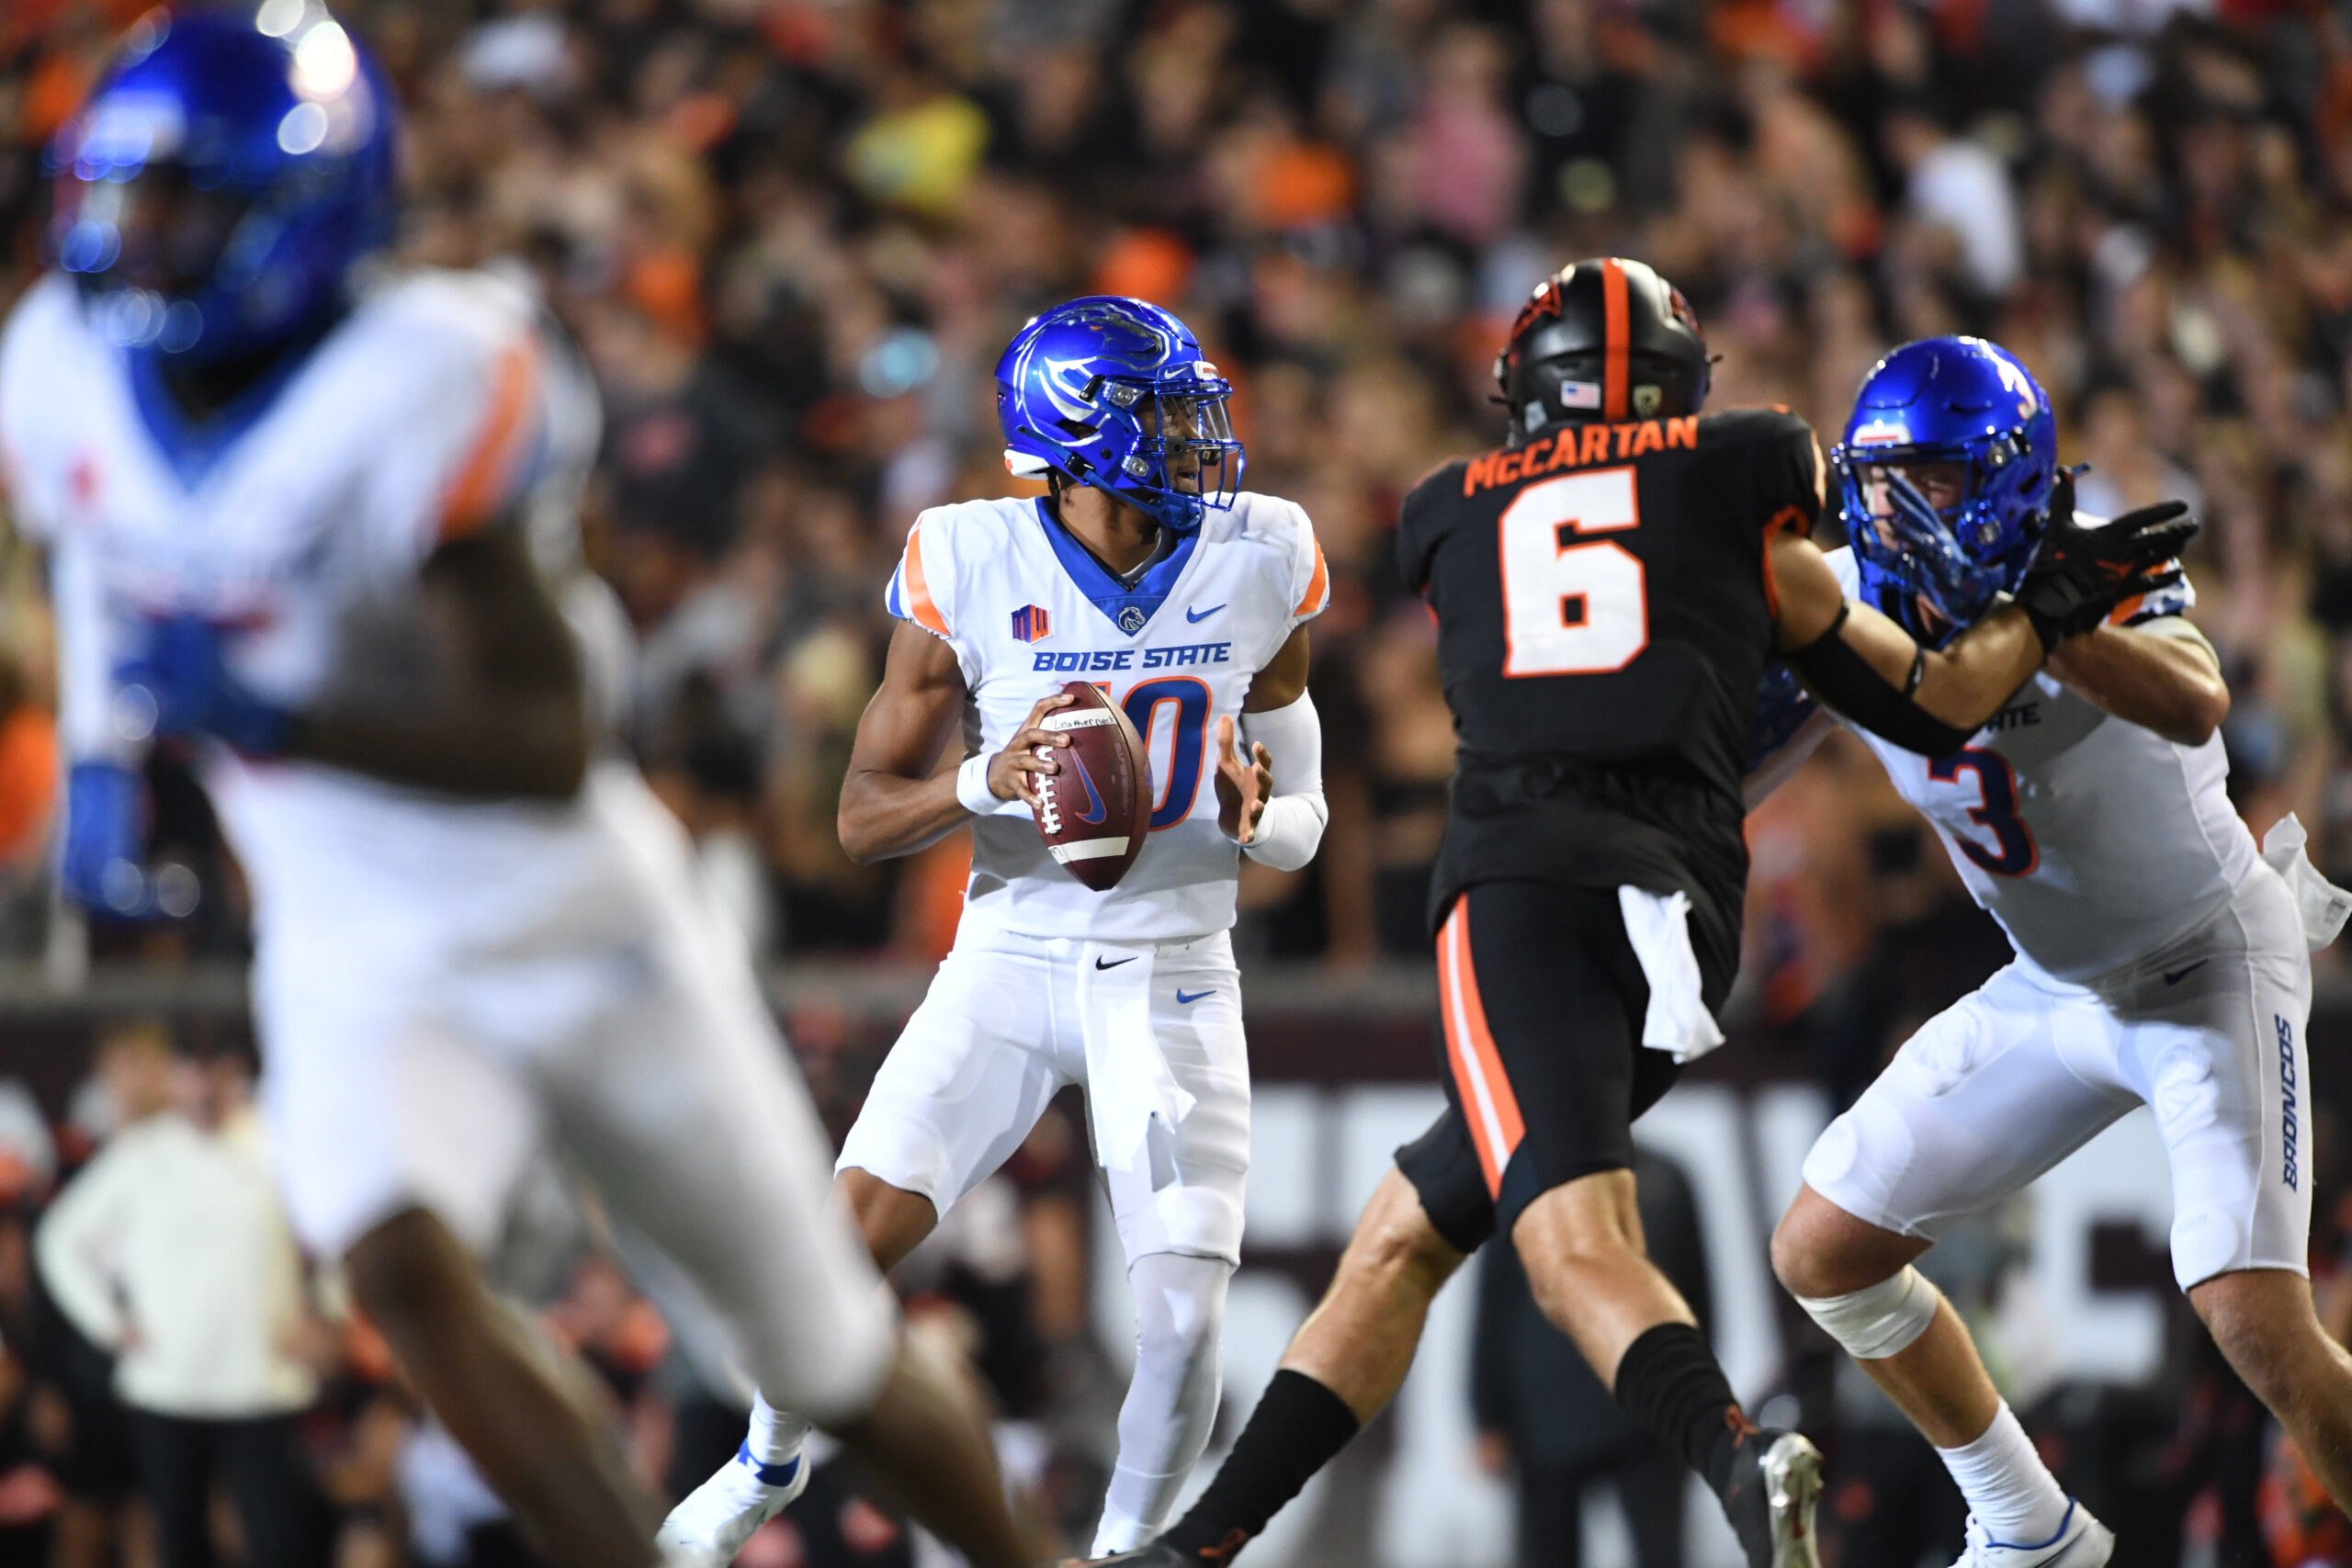 Bronco Breakdown Players to watch, key stats and more for Boise State